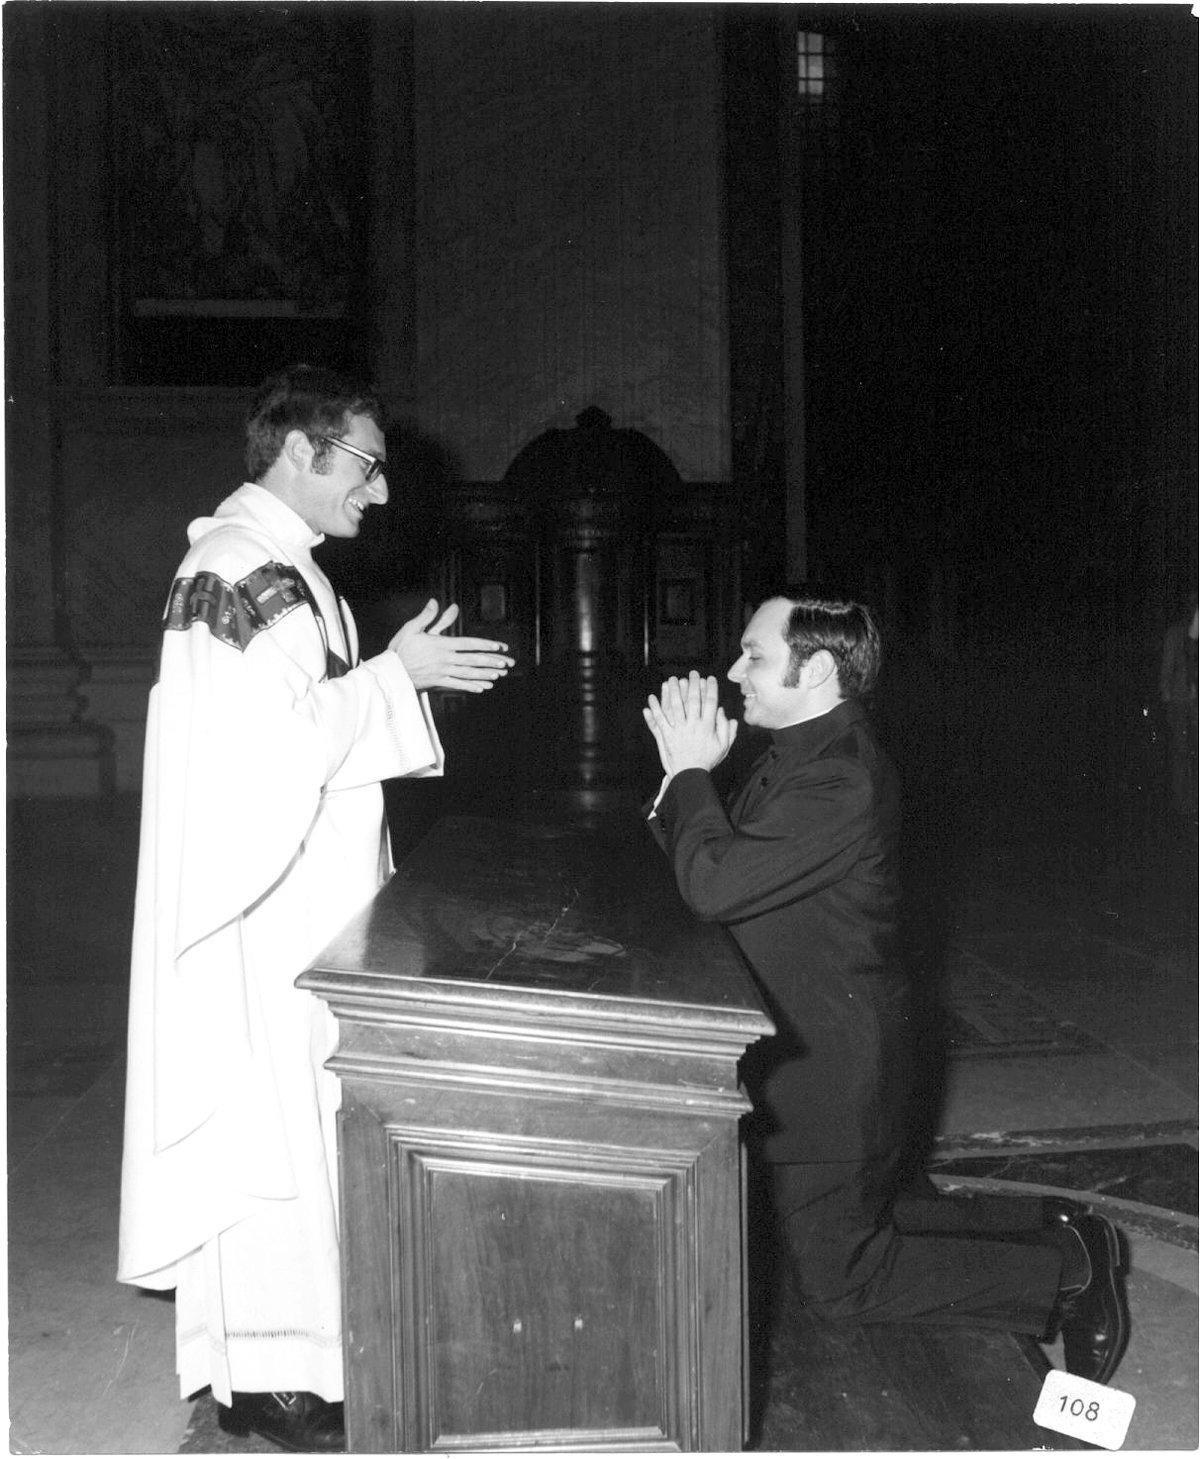 Father Evans blesses his longtime friend, then-Deacon Raymond Bastia, at then-Father Evans’ priestly ordination in 1973. The two priests grew up together on Federal Hill and maintain a friendship that continues today.